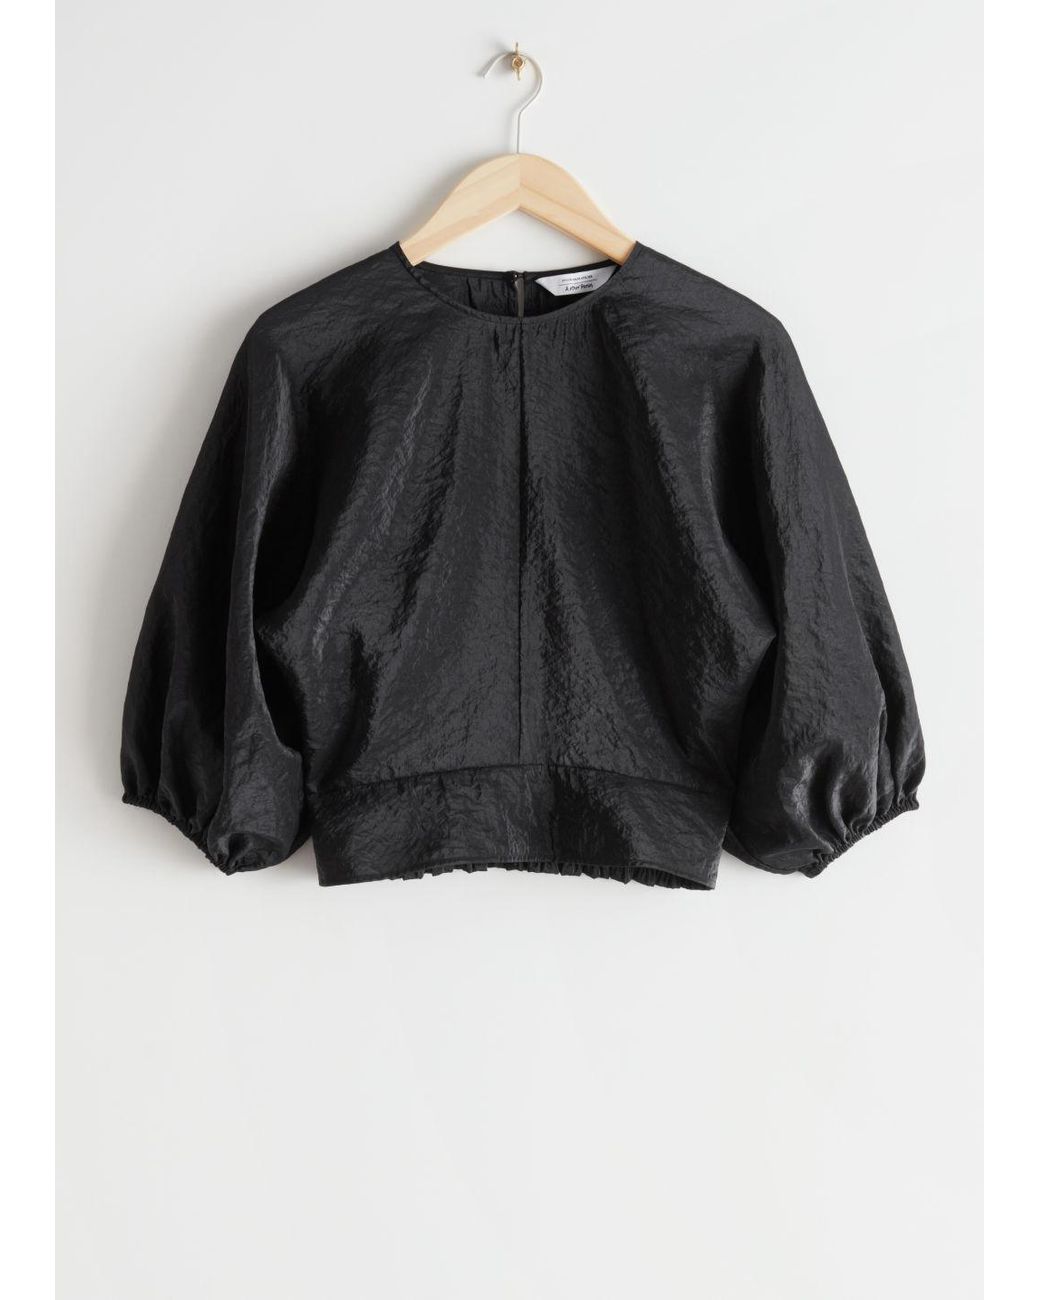 & Other Stories Voluminous Puff Sleeve Top in Black | Lyst